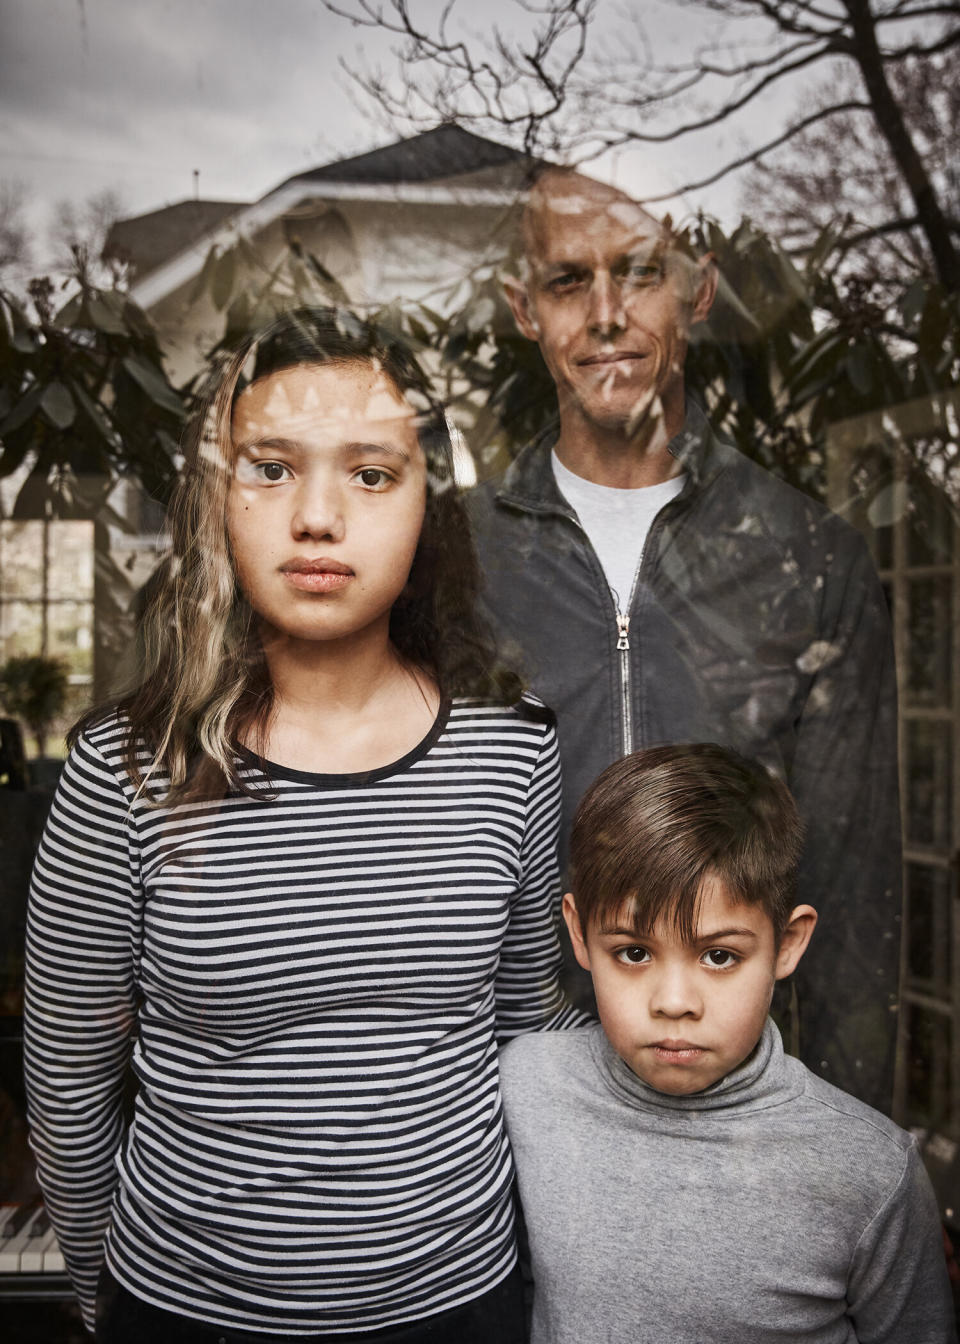 Doak Sergent, the director of brand partnerships at Ipsy, with his daughter, 13, and son, 8.<br /><br />"Our kids are five years apart and in completely different phases of their lives, so if there's a silver lining, it's that this has forced them to connect and rely on one another in ways that they might not have otherwise," Sergent said. "They're spending time together, playing together and even helping each other out with chores."